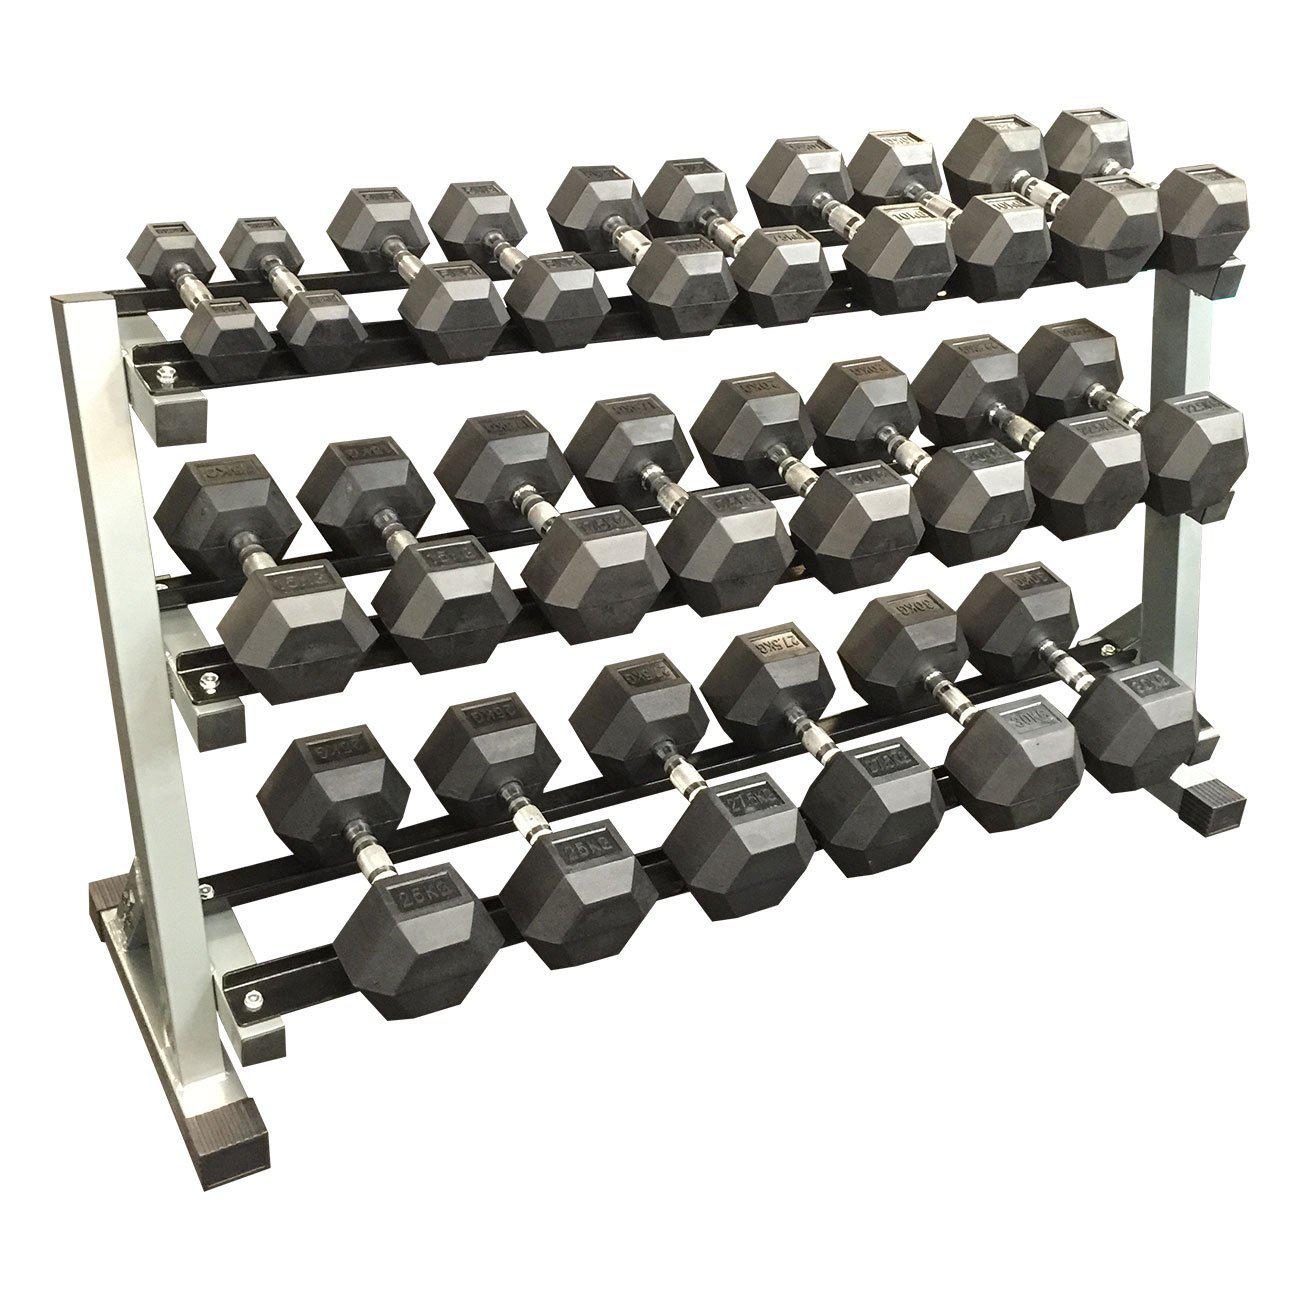 2.5kg-30kg (12 PAIR) Rubber Hex Dumbbell Set with 3 Tier Rack-Rubber Hex Dumbbell Package-Gym Direct